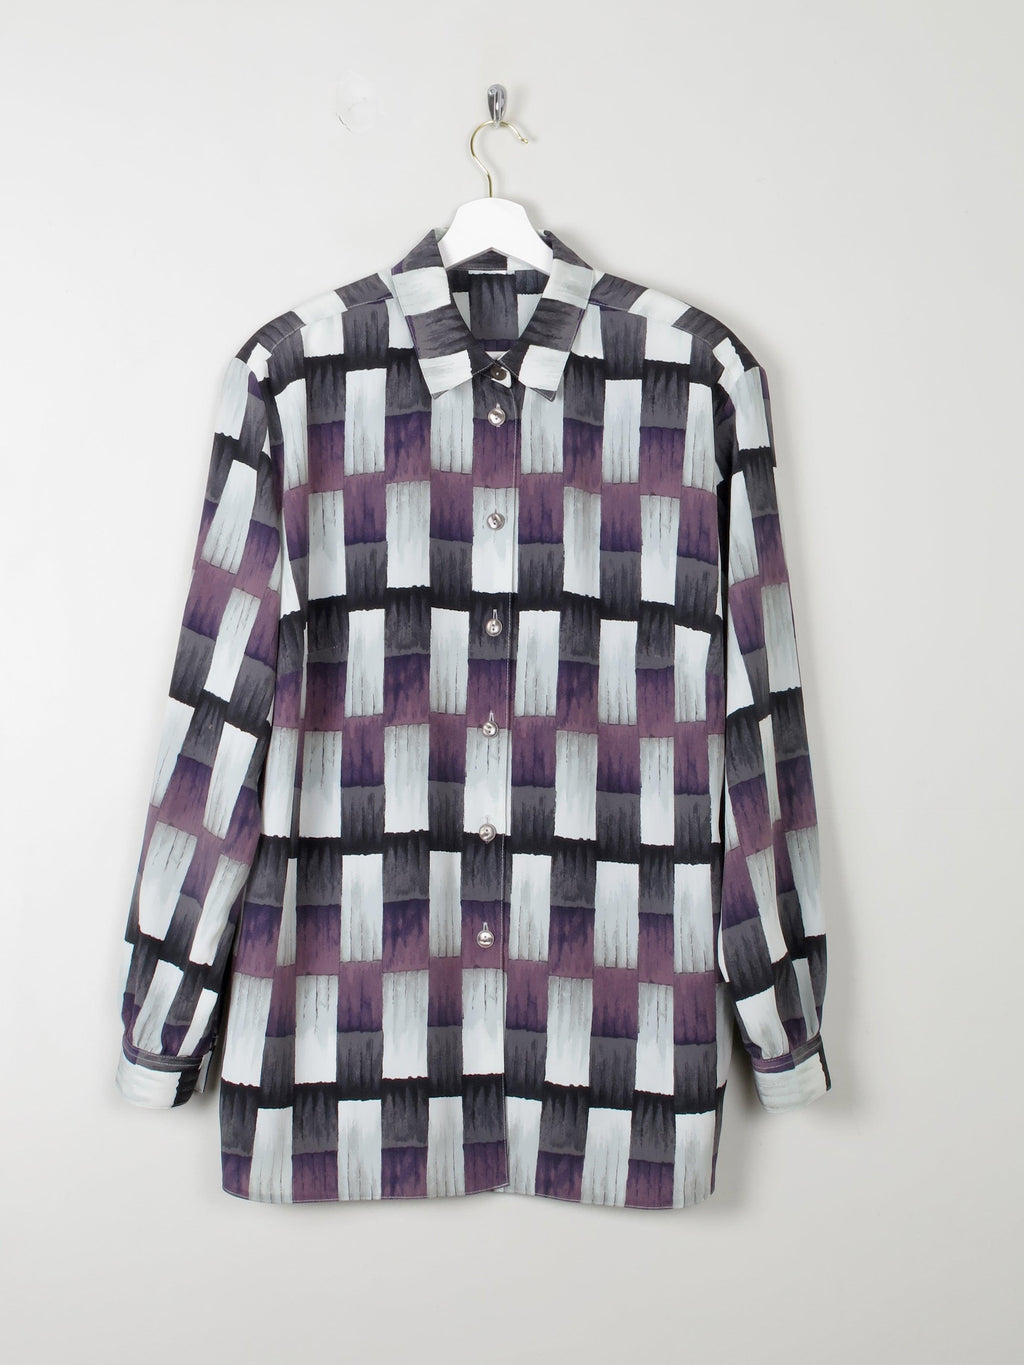 Women's Vintage Printed Blouse M-XL - The Harlequin